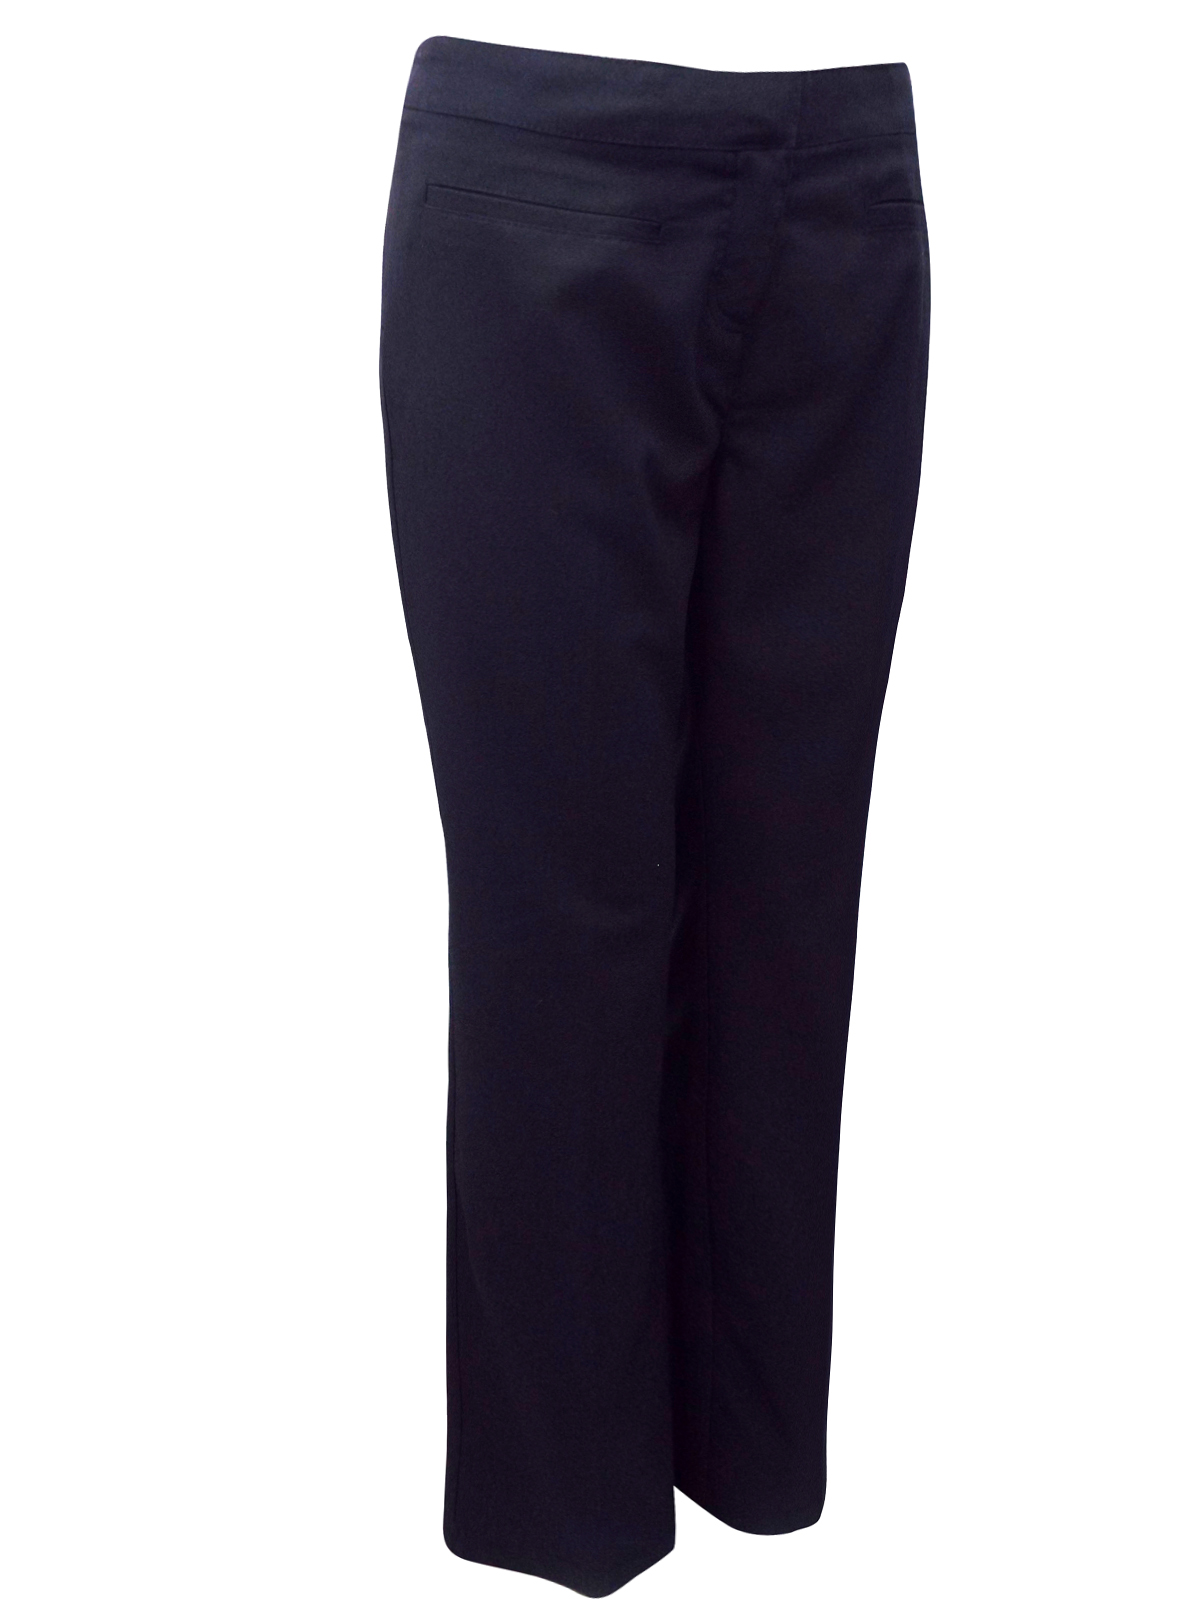 NAVY Flat Front Straight Leg Trousers - Size 10 to 22 (REGULAR 30